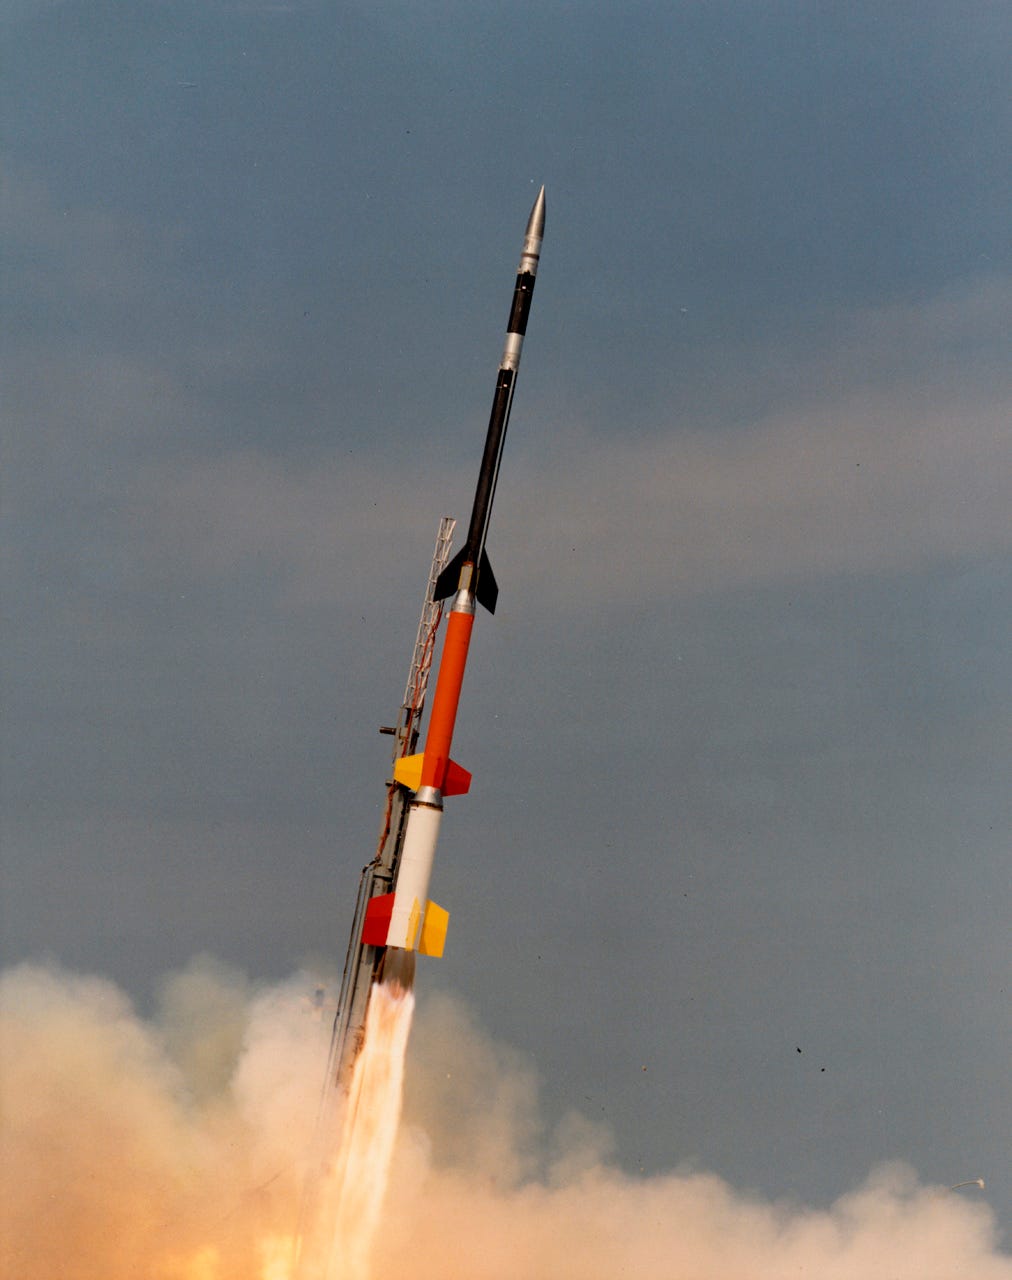 A Black Brant 12 rocket, similar to the one that would have been launched on this day in history.